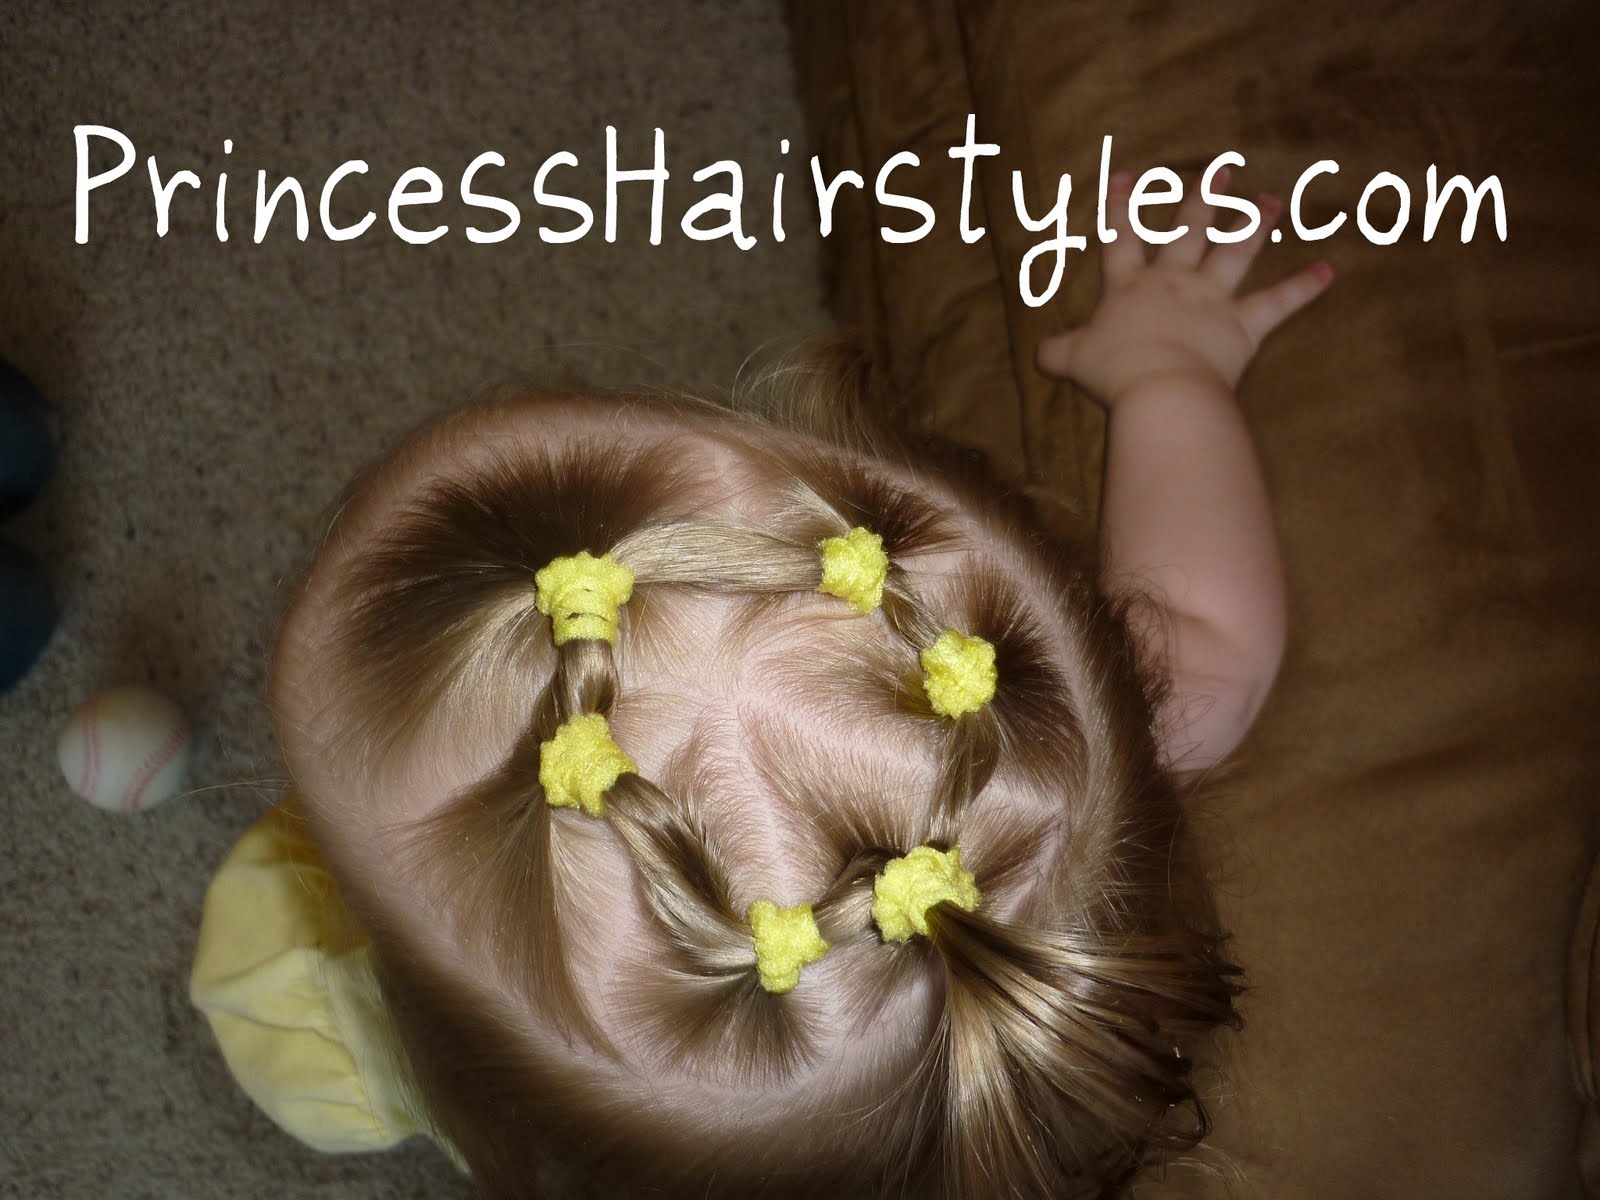 Baby Hairstyles - Elastic Halo | Hairstyles For Girls - Princess Hairstyles